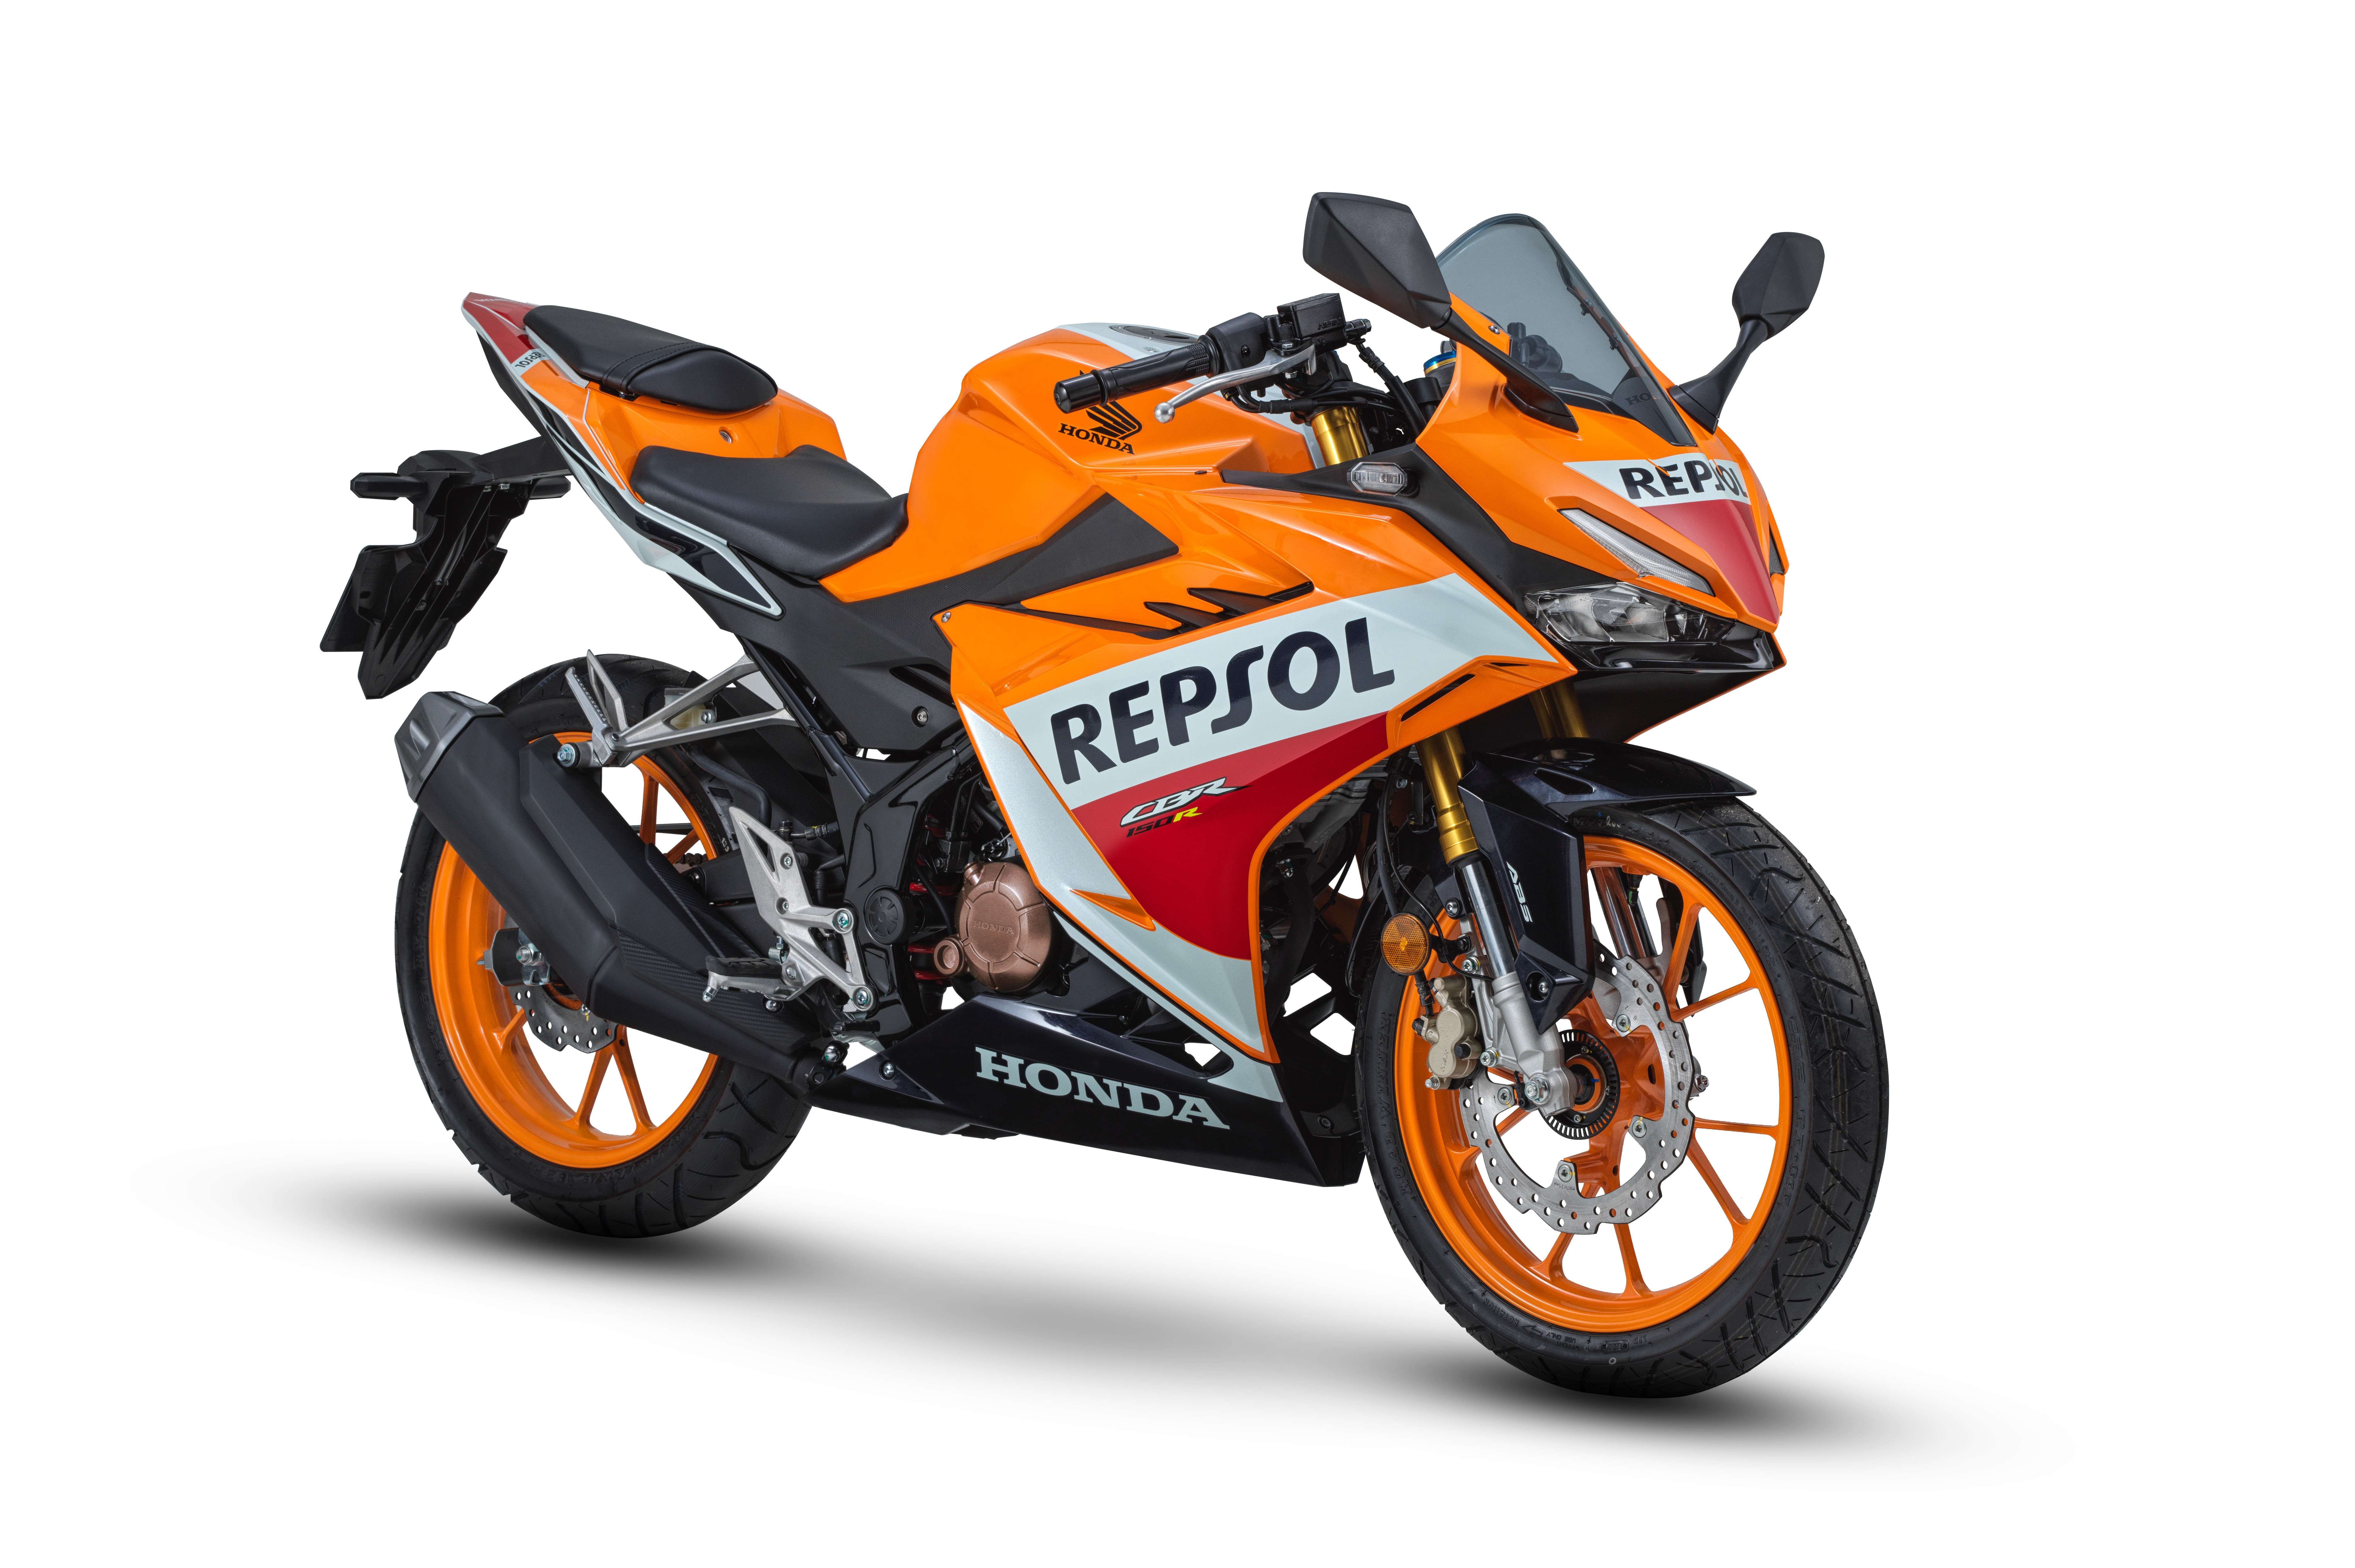 Lyrisch Puur Ver weg 2022 Honda CBR150R Repsol Edition now in Malaysia, priced at RM13,499,  limited edition of 800 units - paultan.org